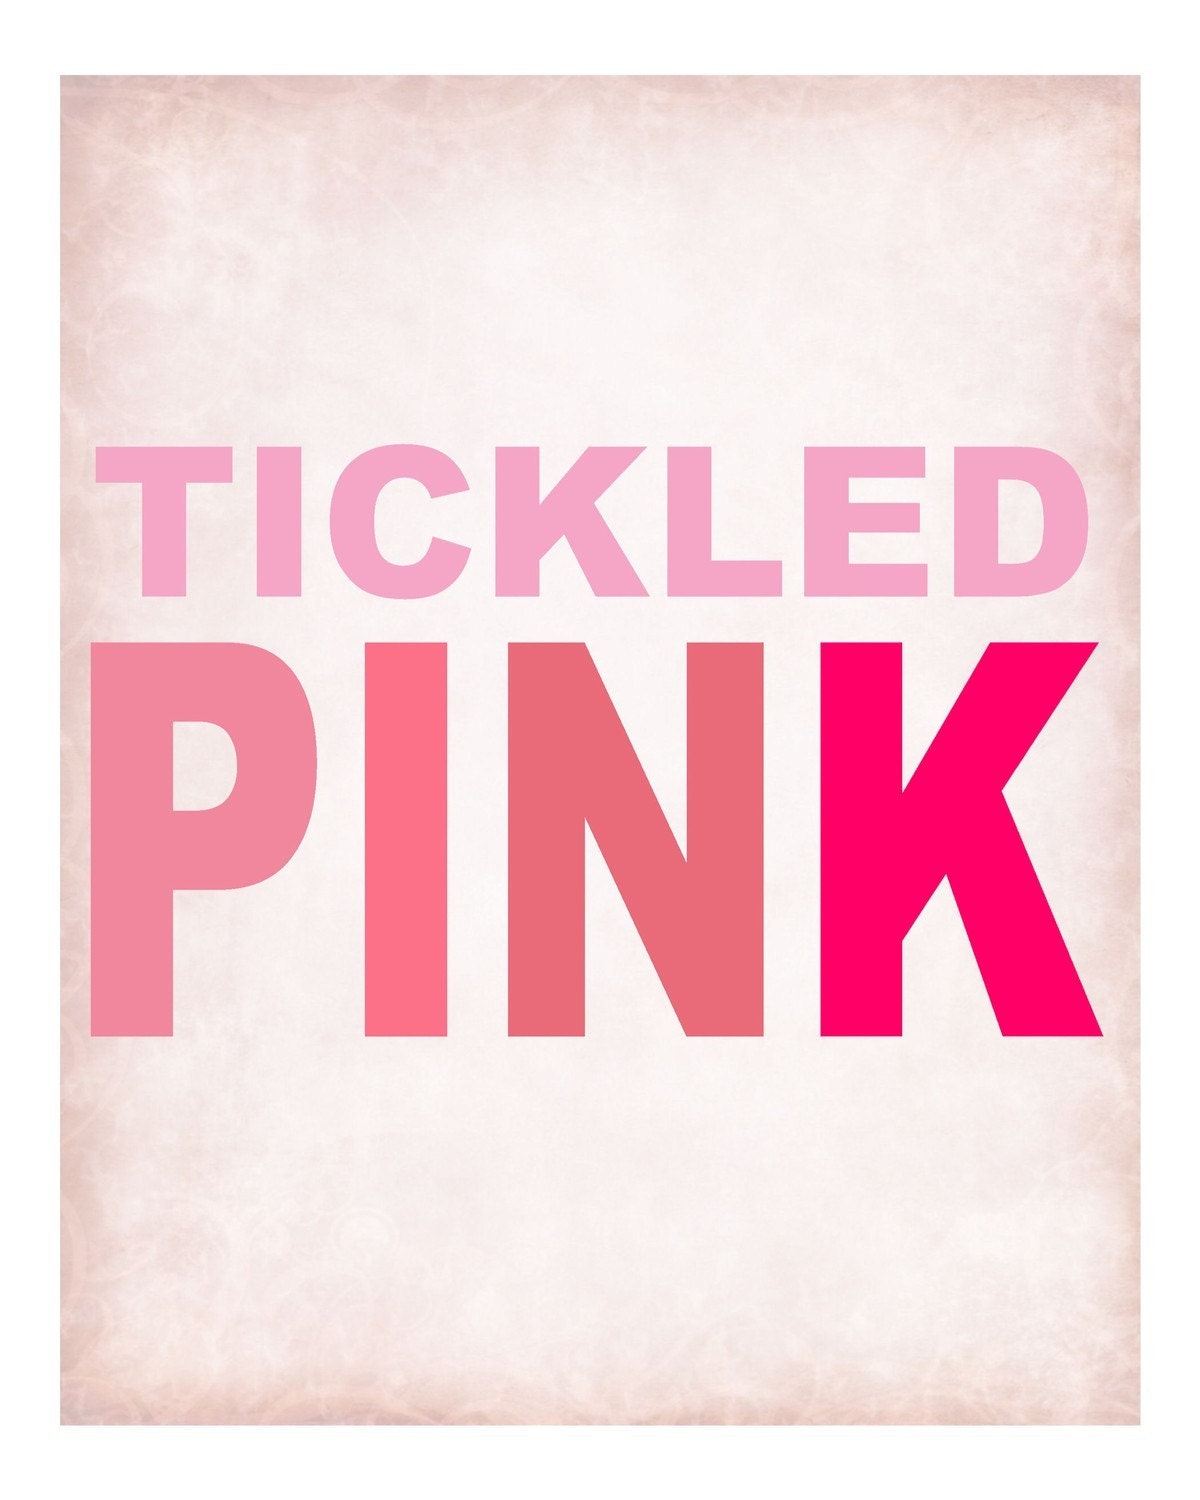 Tickled Pink Poster Print 8x10